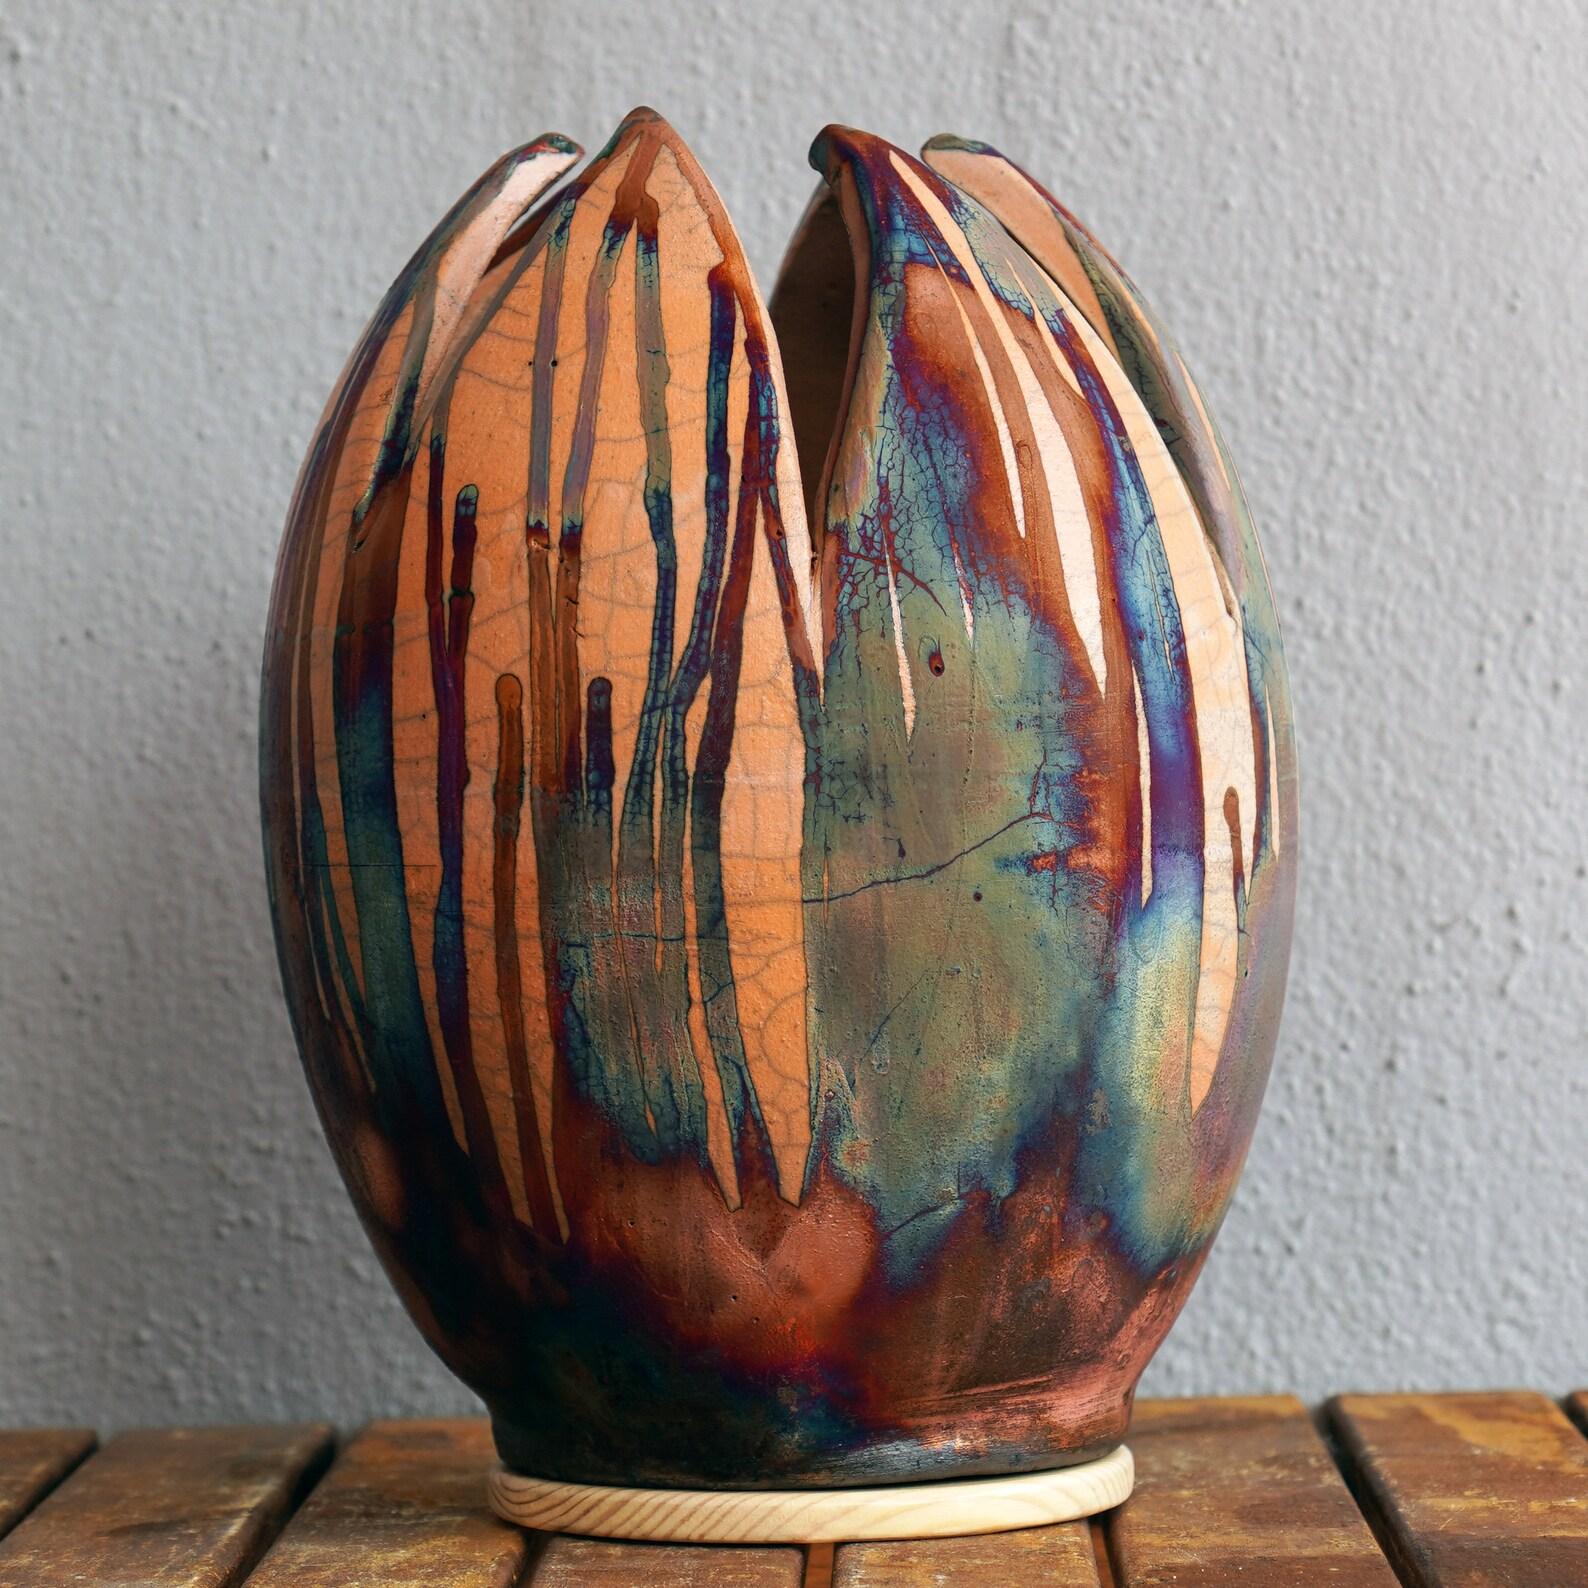 This is a pre-order

I am proud to share my latest Art series vase shape : The Flower vase.

With a shape inspired from the tulip flower, the RAAQUU flower vase expresses a wonderful rainbow sheen on a 6 half petal top oval shaped vase. This